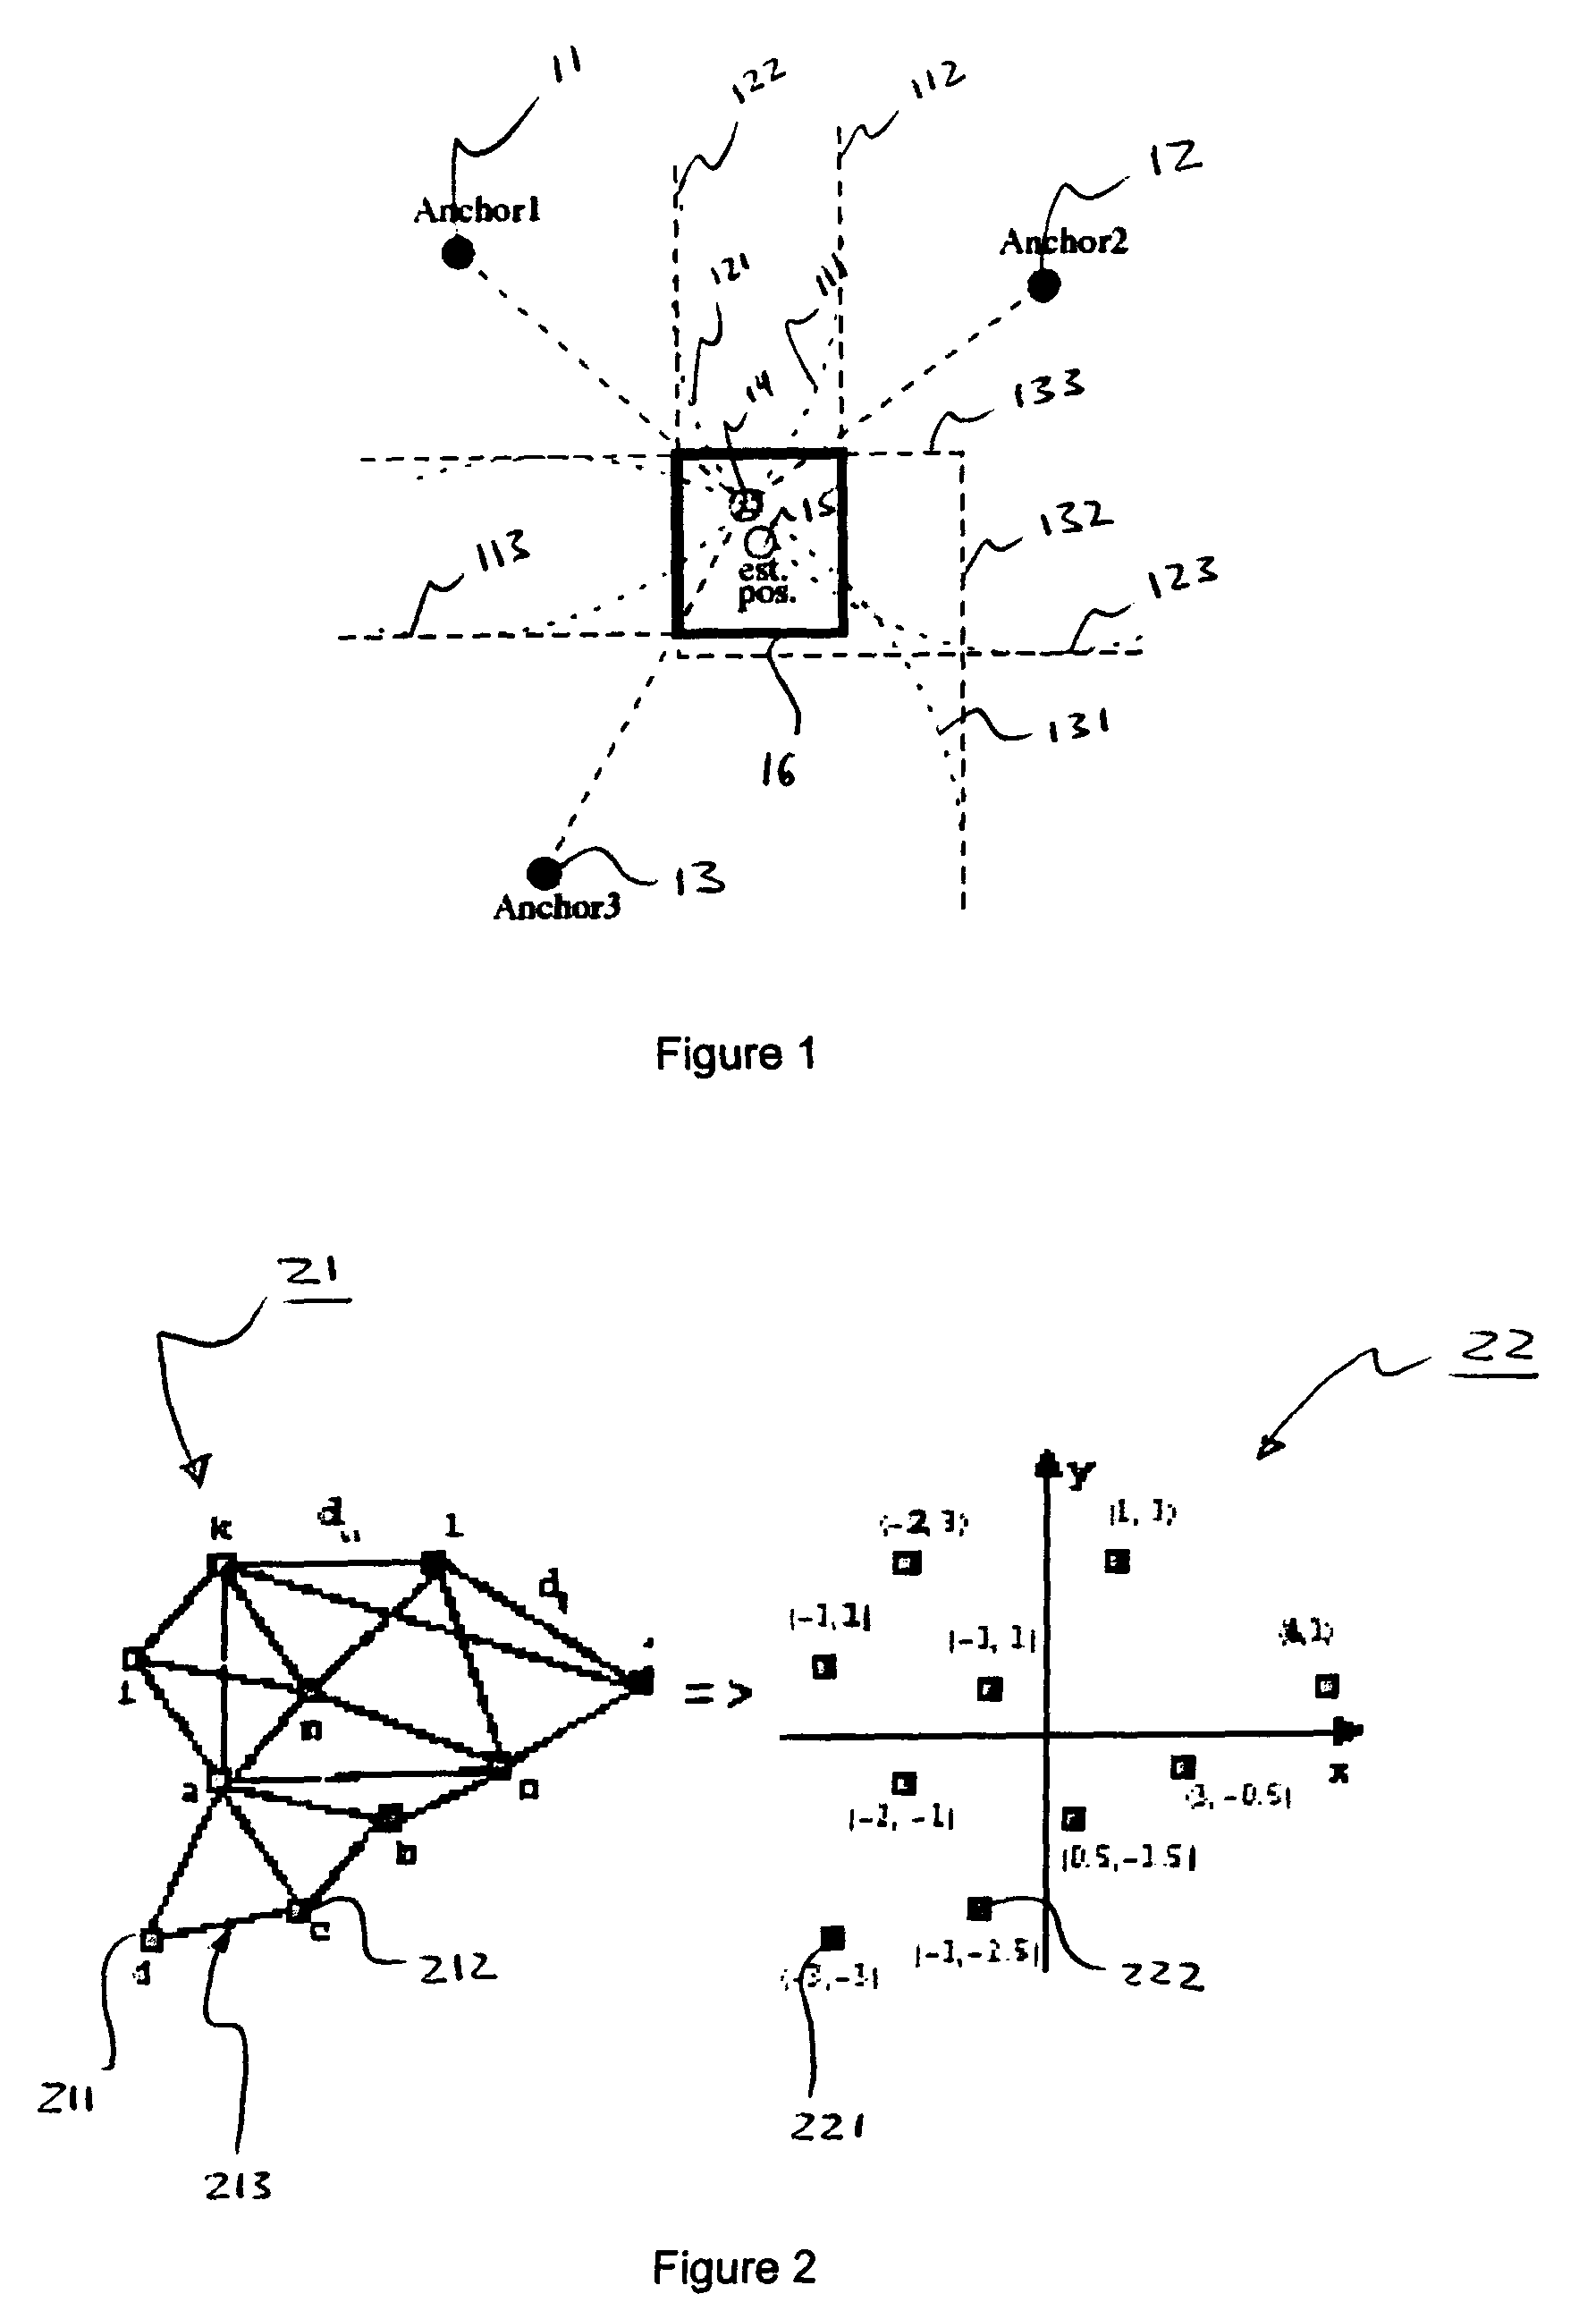 Relative 3D positioning in an ad-hoc network based on distances